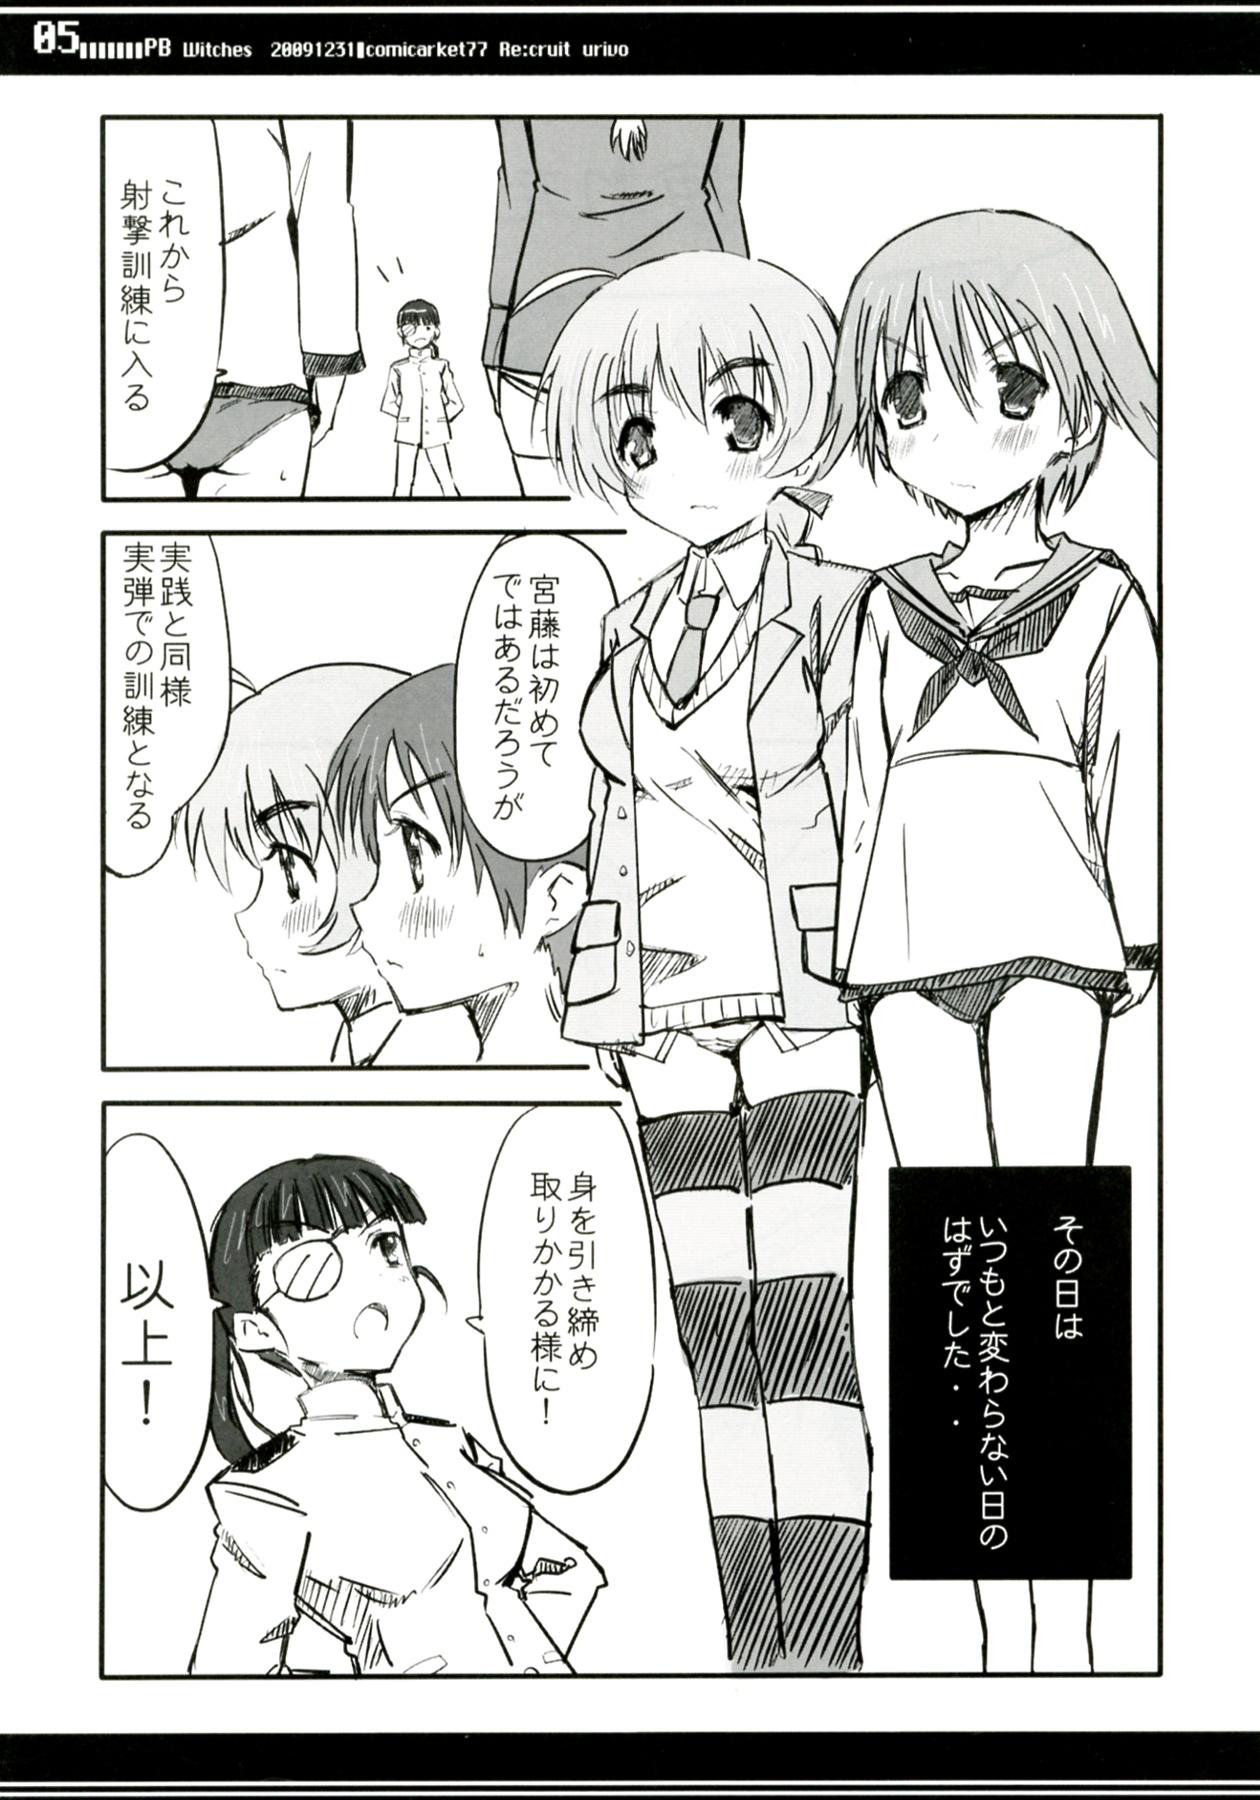 Nasty PB Witches - Strike witches Hard Fucking - Page 5